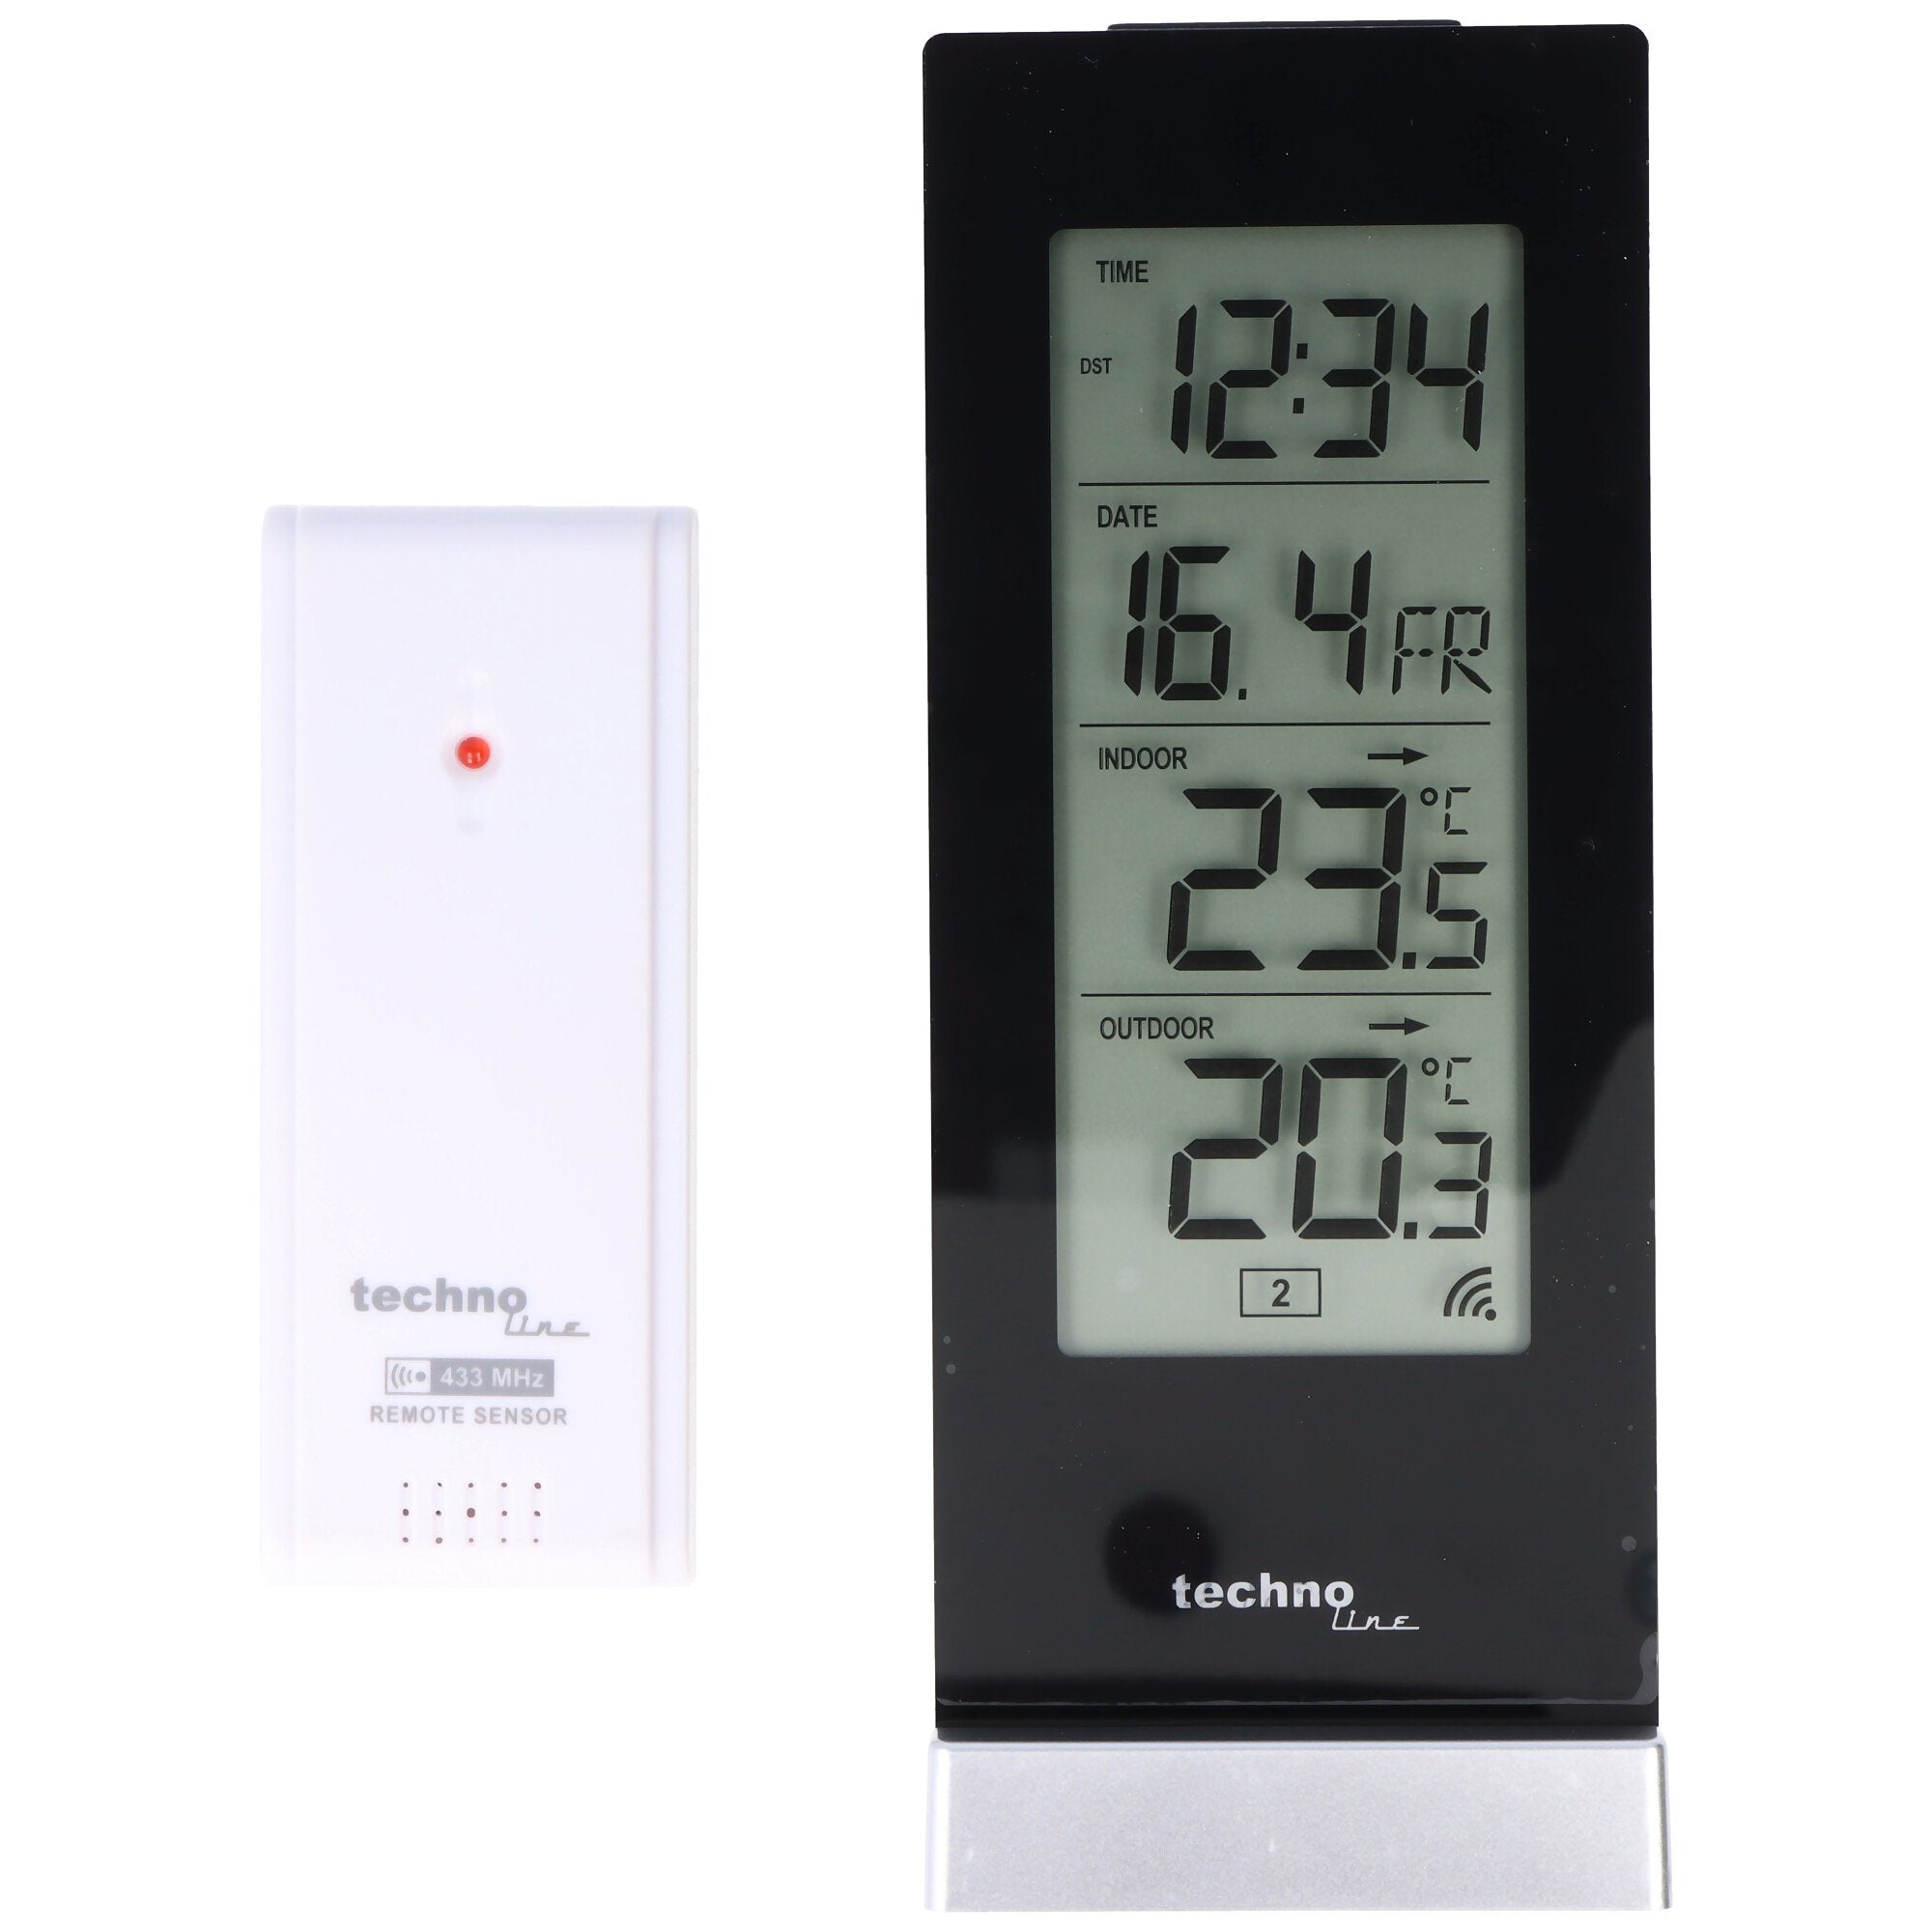 WS 9767 - modern weather station with temperature trend display